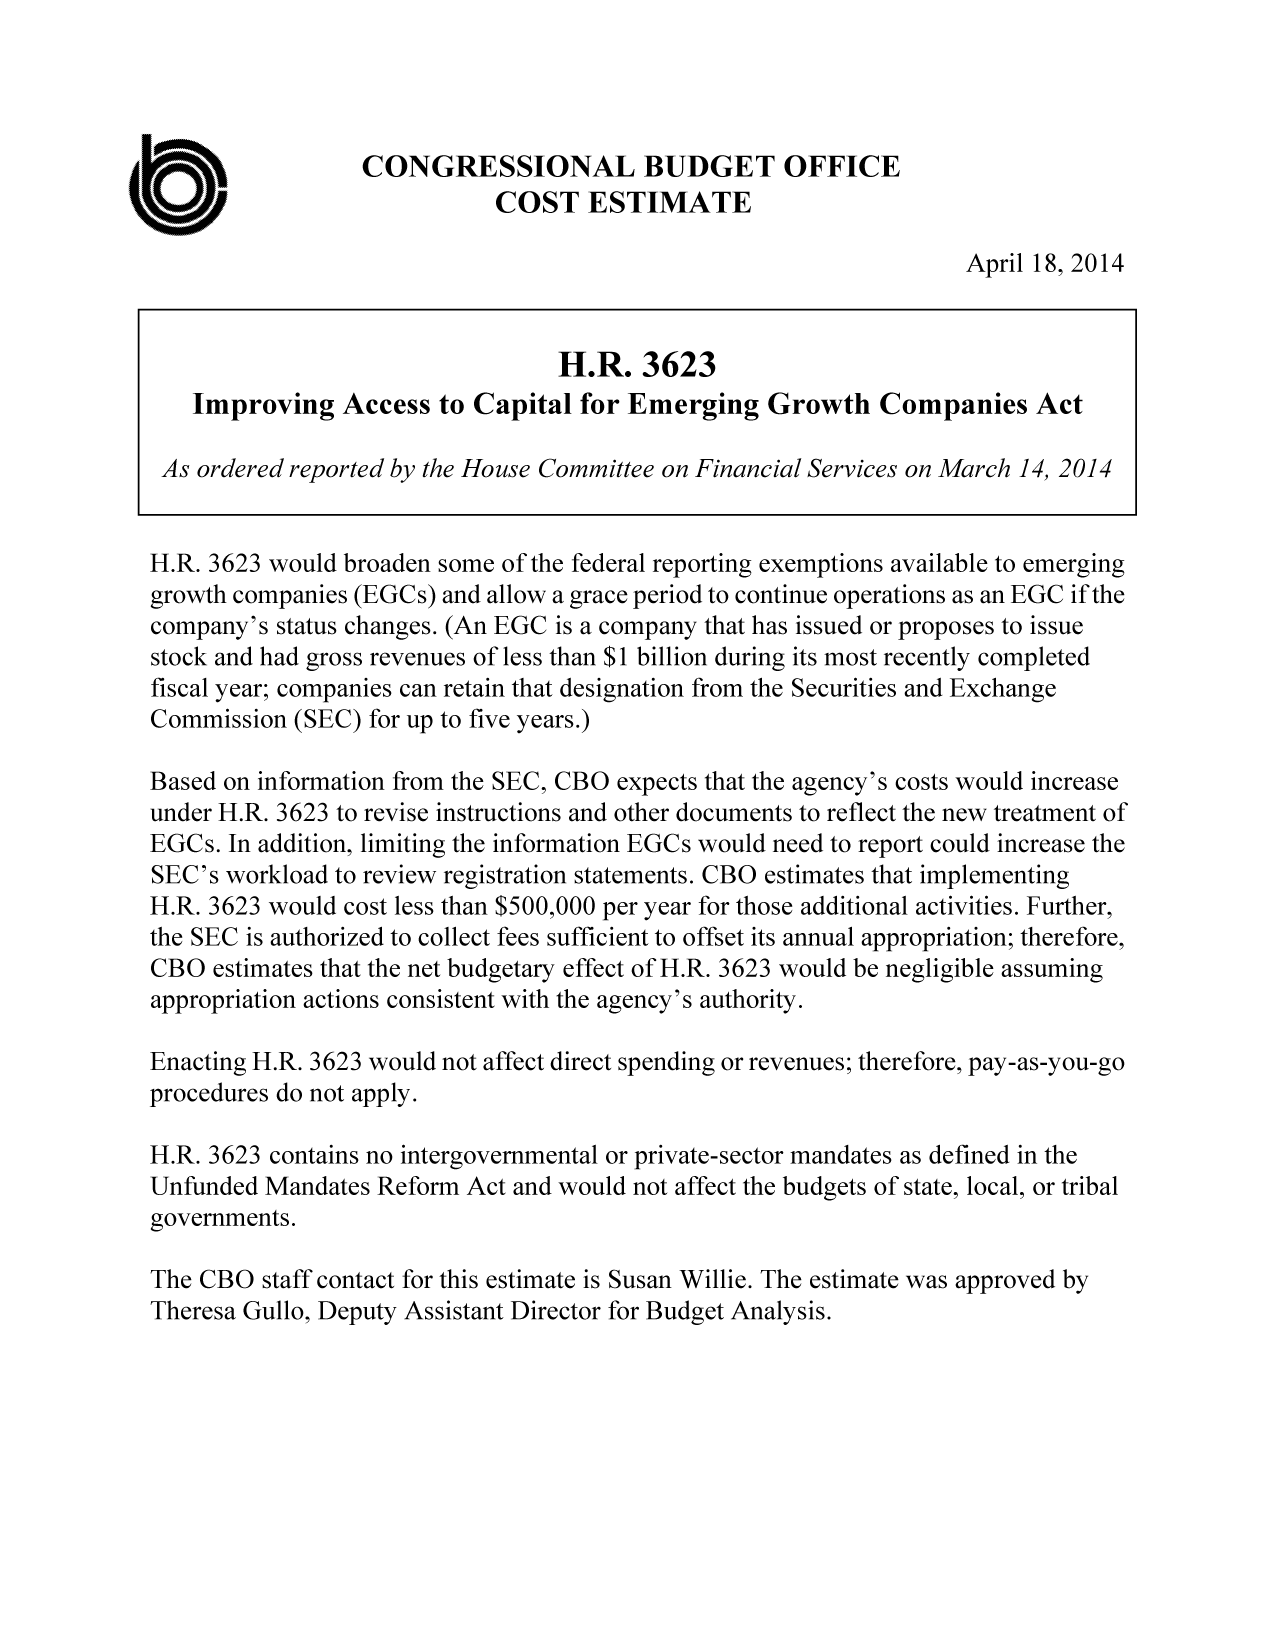 handle is hein.congrec/cbo1598 and id is 1 raw text is: CONGRESSIONAL BUDGET OFFICE
COST ESTIMATE
April 18, 2014
H.R. 3623
Improving Access to Capital for Emerging Growth Companies Act
As ordered reported by the House Committee on Financial Services on March 14, 2014
H.R. 3623 would broaden some of the federal reporting exemptions available to emerging
growth companies (EGCs) and allow a grace period to continue operations as an EGC if the
company's status changes. (An EGC is a company that has issued or proposes to issue
stock and had gross revenues of less than $1 billion during its most recently completed
fiscal year; companies can retain that designation from the Securities and Exchange
Commission (SEC) for up to five years.)
Based on information from the SEC, CBO expects that the agency's costs would increase
under H.R. 3623 to revise instructions and other documents to reflect the new treatment of
EGCs. In addition, limiting the information EGCs would need to report could increase the
SEC's workload to review registration statements. CBO estimates that implementing
H.R. 3623 would cost less than $500,000 per year for those additional activities. Further,
the SEC is authorized to collect fees sufficient to offset its annual appropriation; therefore,
CBO estimates that the net budgetary effect of H.R. 3623 would be negligible assuming
appropriation actions consistent with the agency's authority.
Enacting H.R. 3623 would not affect direct spending or revenues; therefore, pay-as-you-go
procedures do not apply.
H.R. 3623 contains no intergovernmental or private-sector mandates as defined in the
Unfunded Mandates Reform Act and would not affect the budgets of state, local, or tribal
governments.
The CBO staff contact for this estimate is Susan Willie. The estimate was approved by
Theresa Gullo, Deputy Assistant Director for Budget Analysis.


